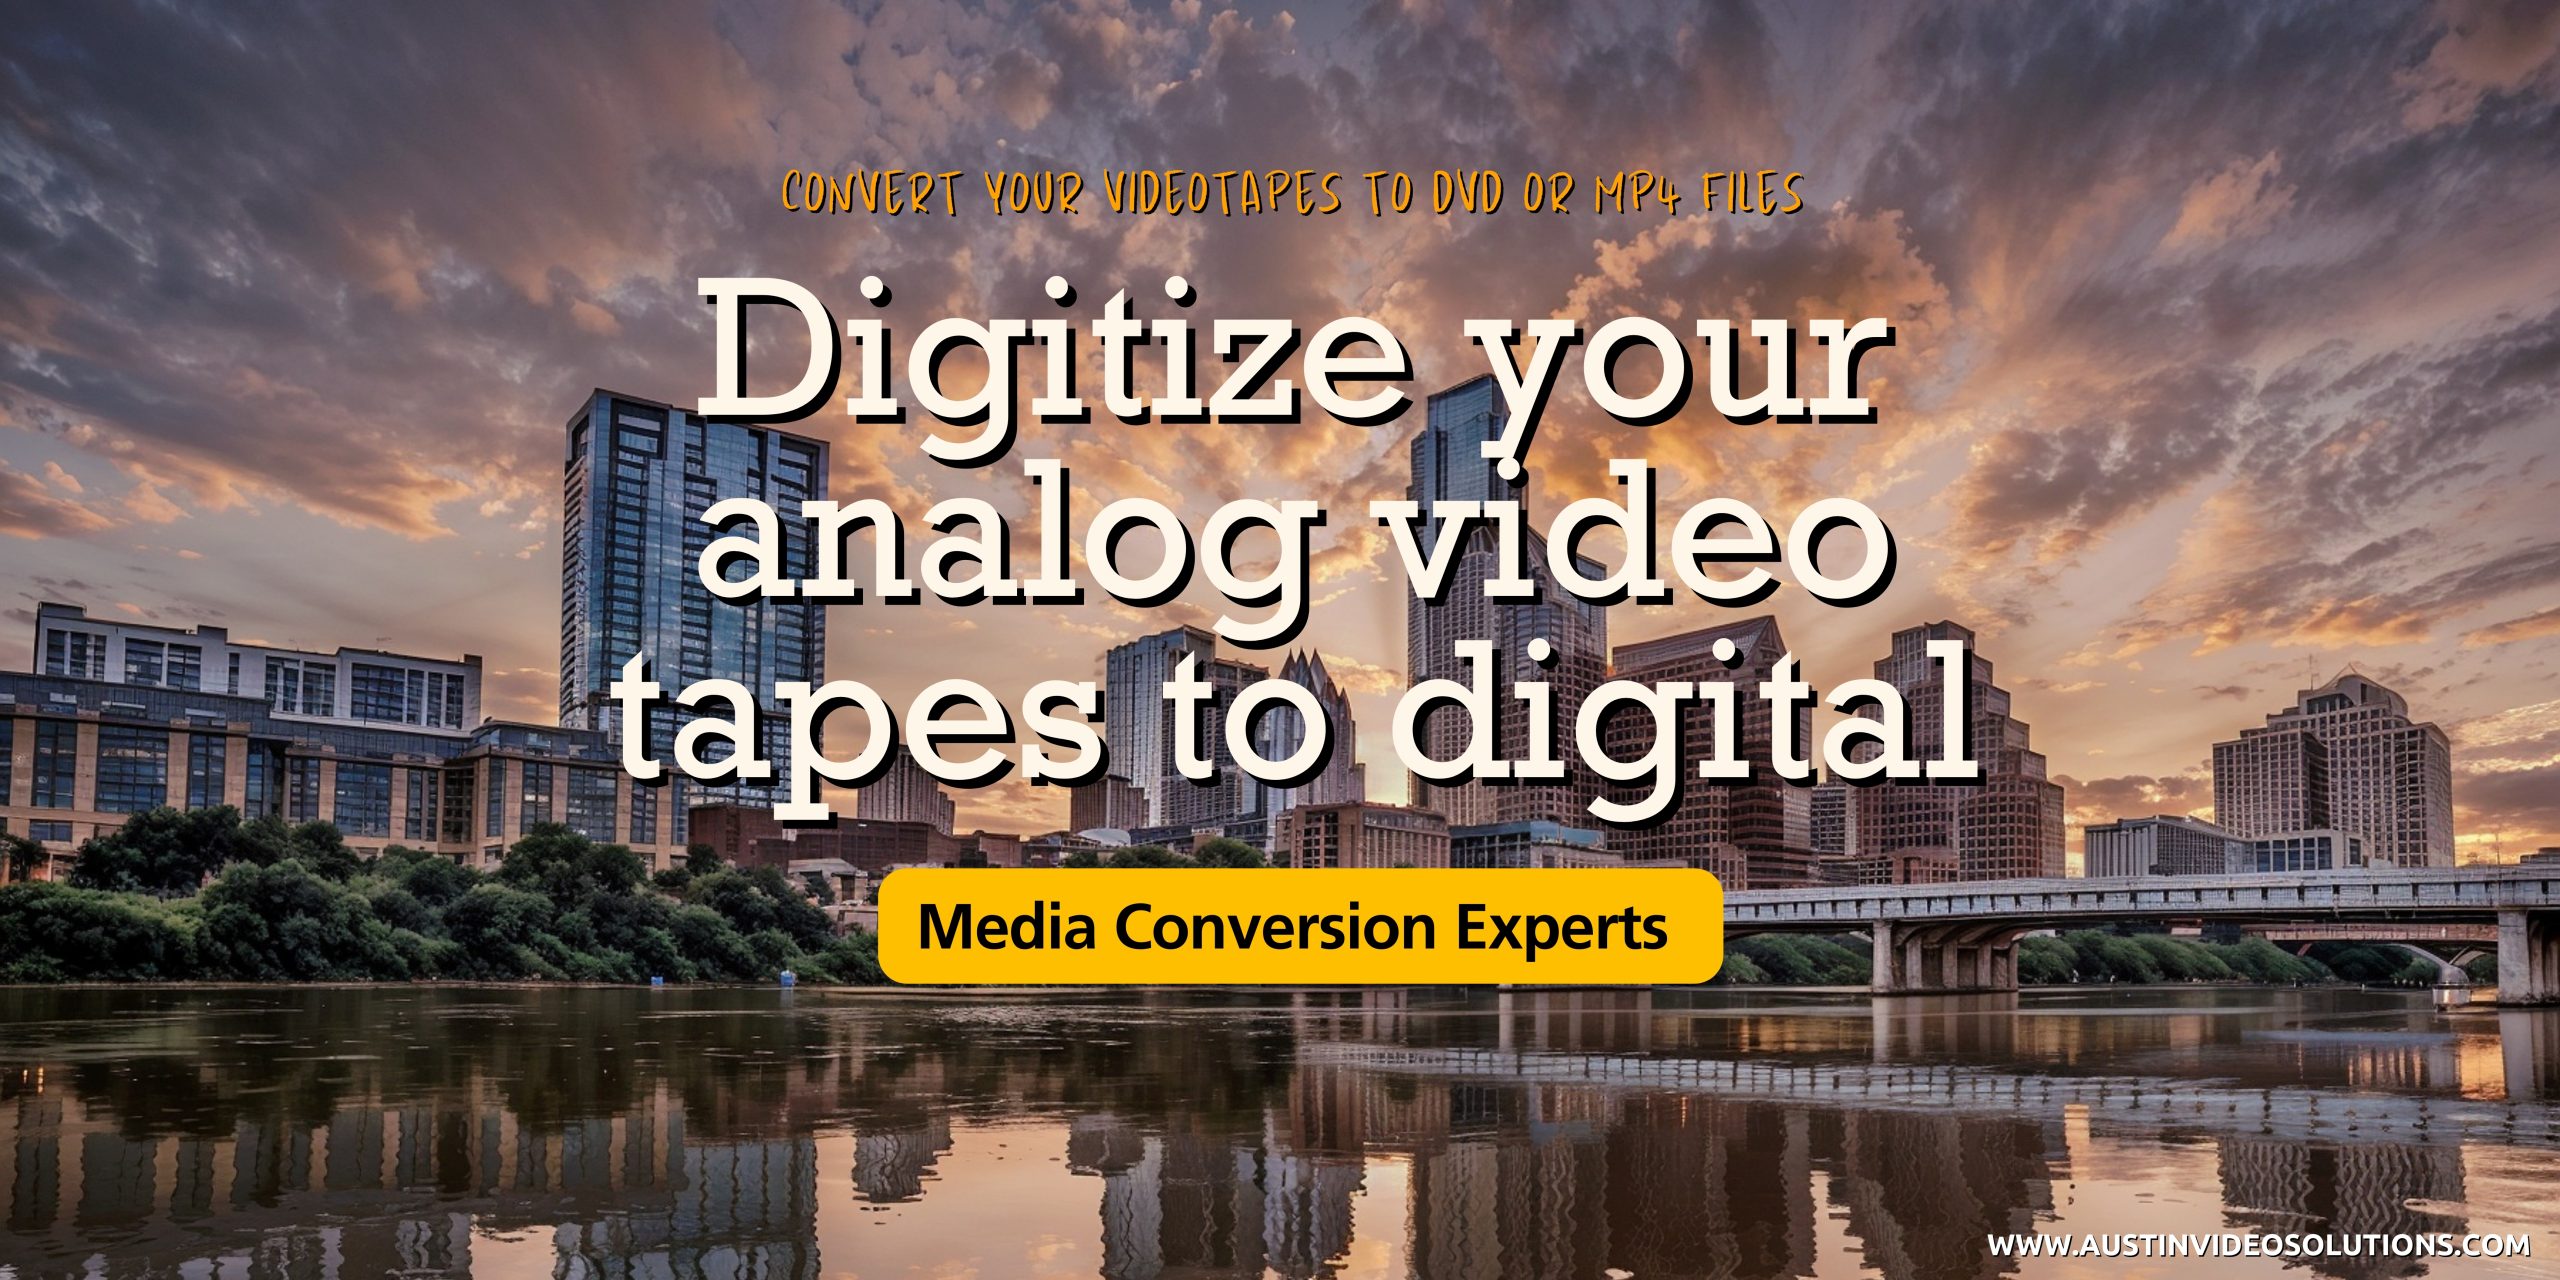 Future-Proof Your Home Video Tapes with Austin Video Solutions